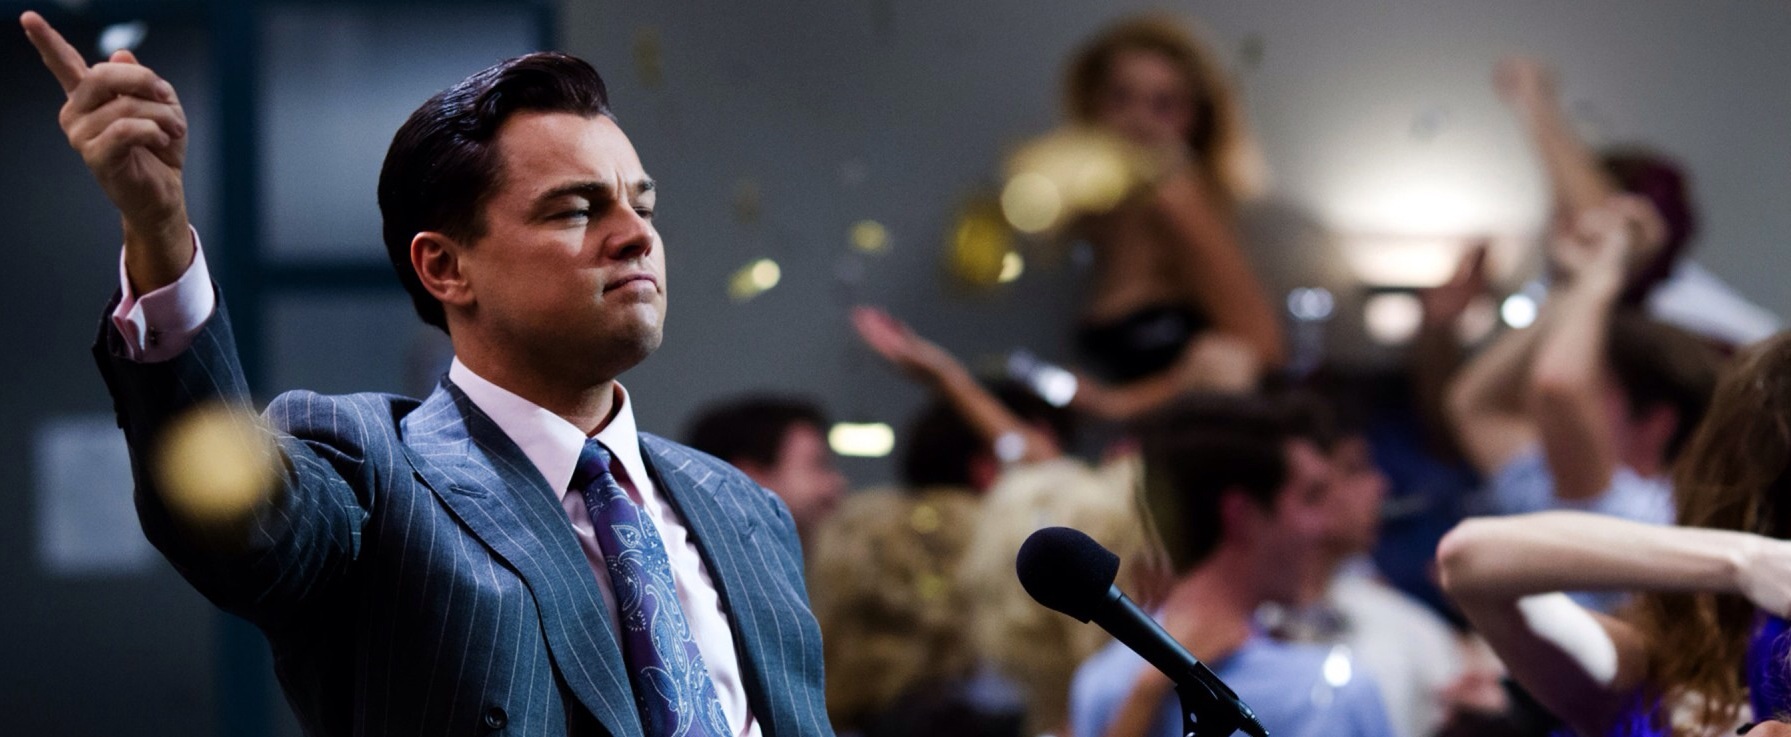 The Wolf of Wall Street Blu-ray Steelbook will be released in Germany